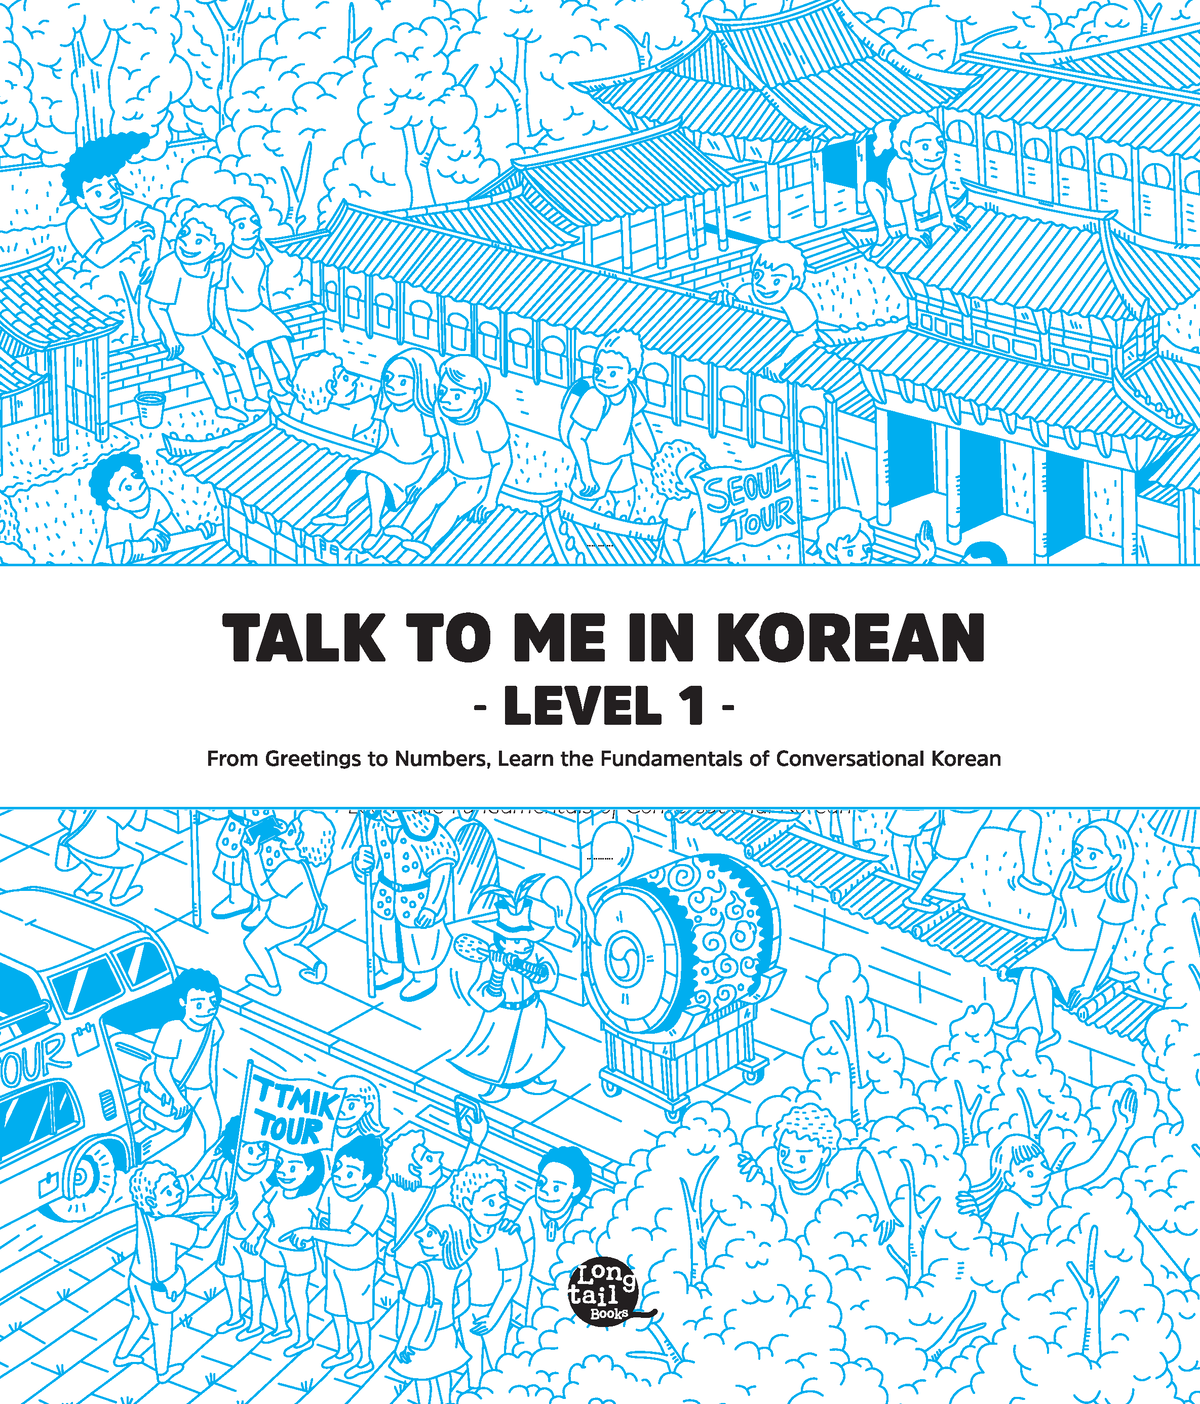 Talk To Me In Korean Level 1 - TALK TO ME IN KOREAN From Greetings